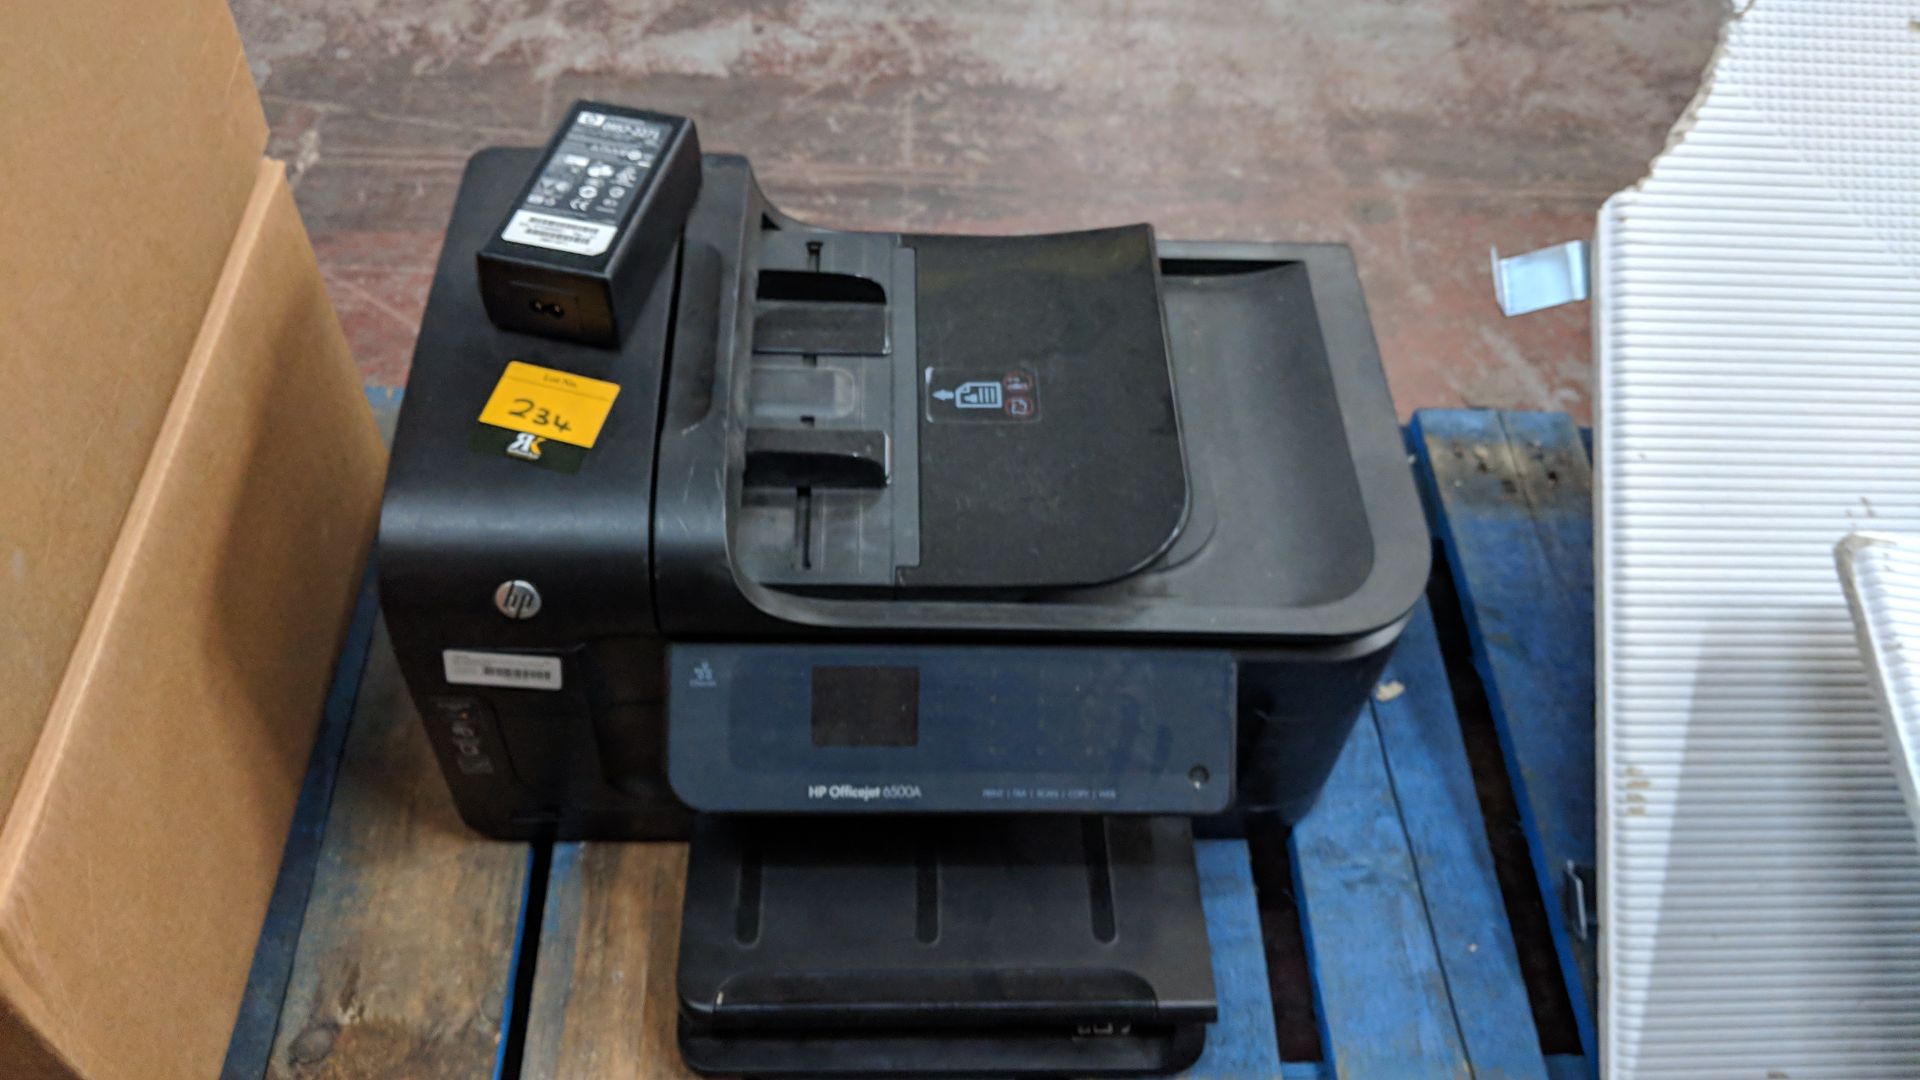 HP OfficeJet 6500A multifunction printer IMPORTANT: Please remember goods successfully bid upon must - Image 3 of 4